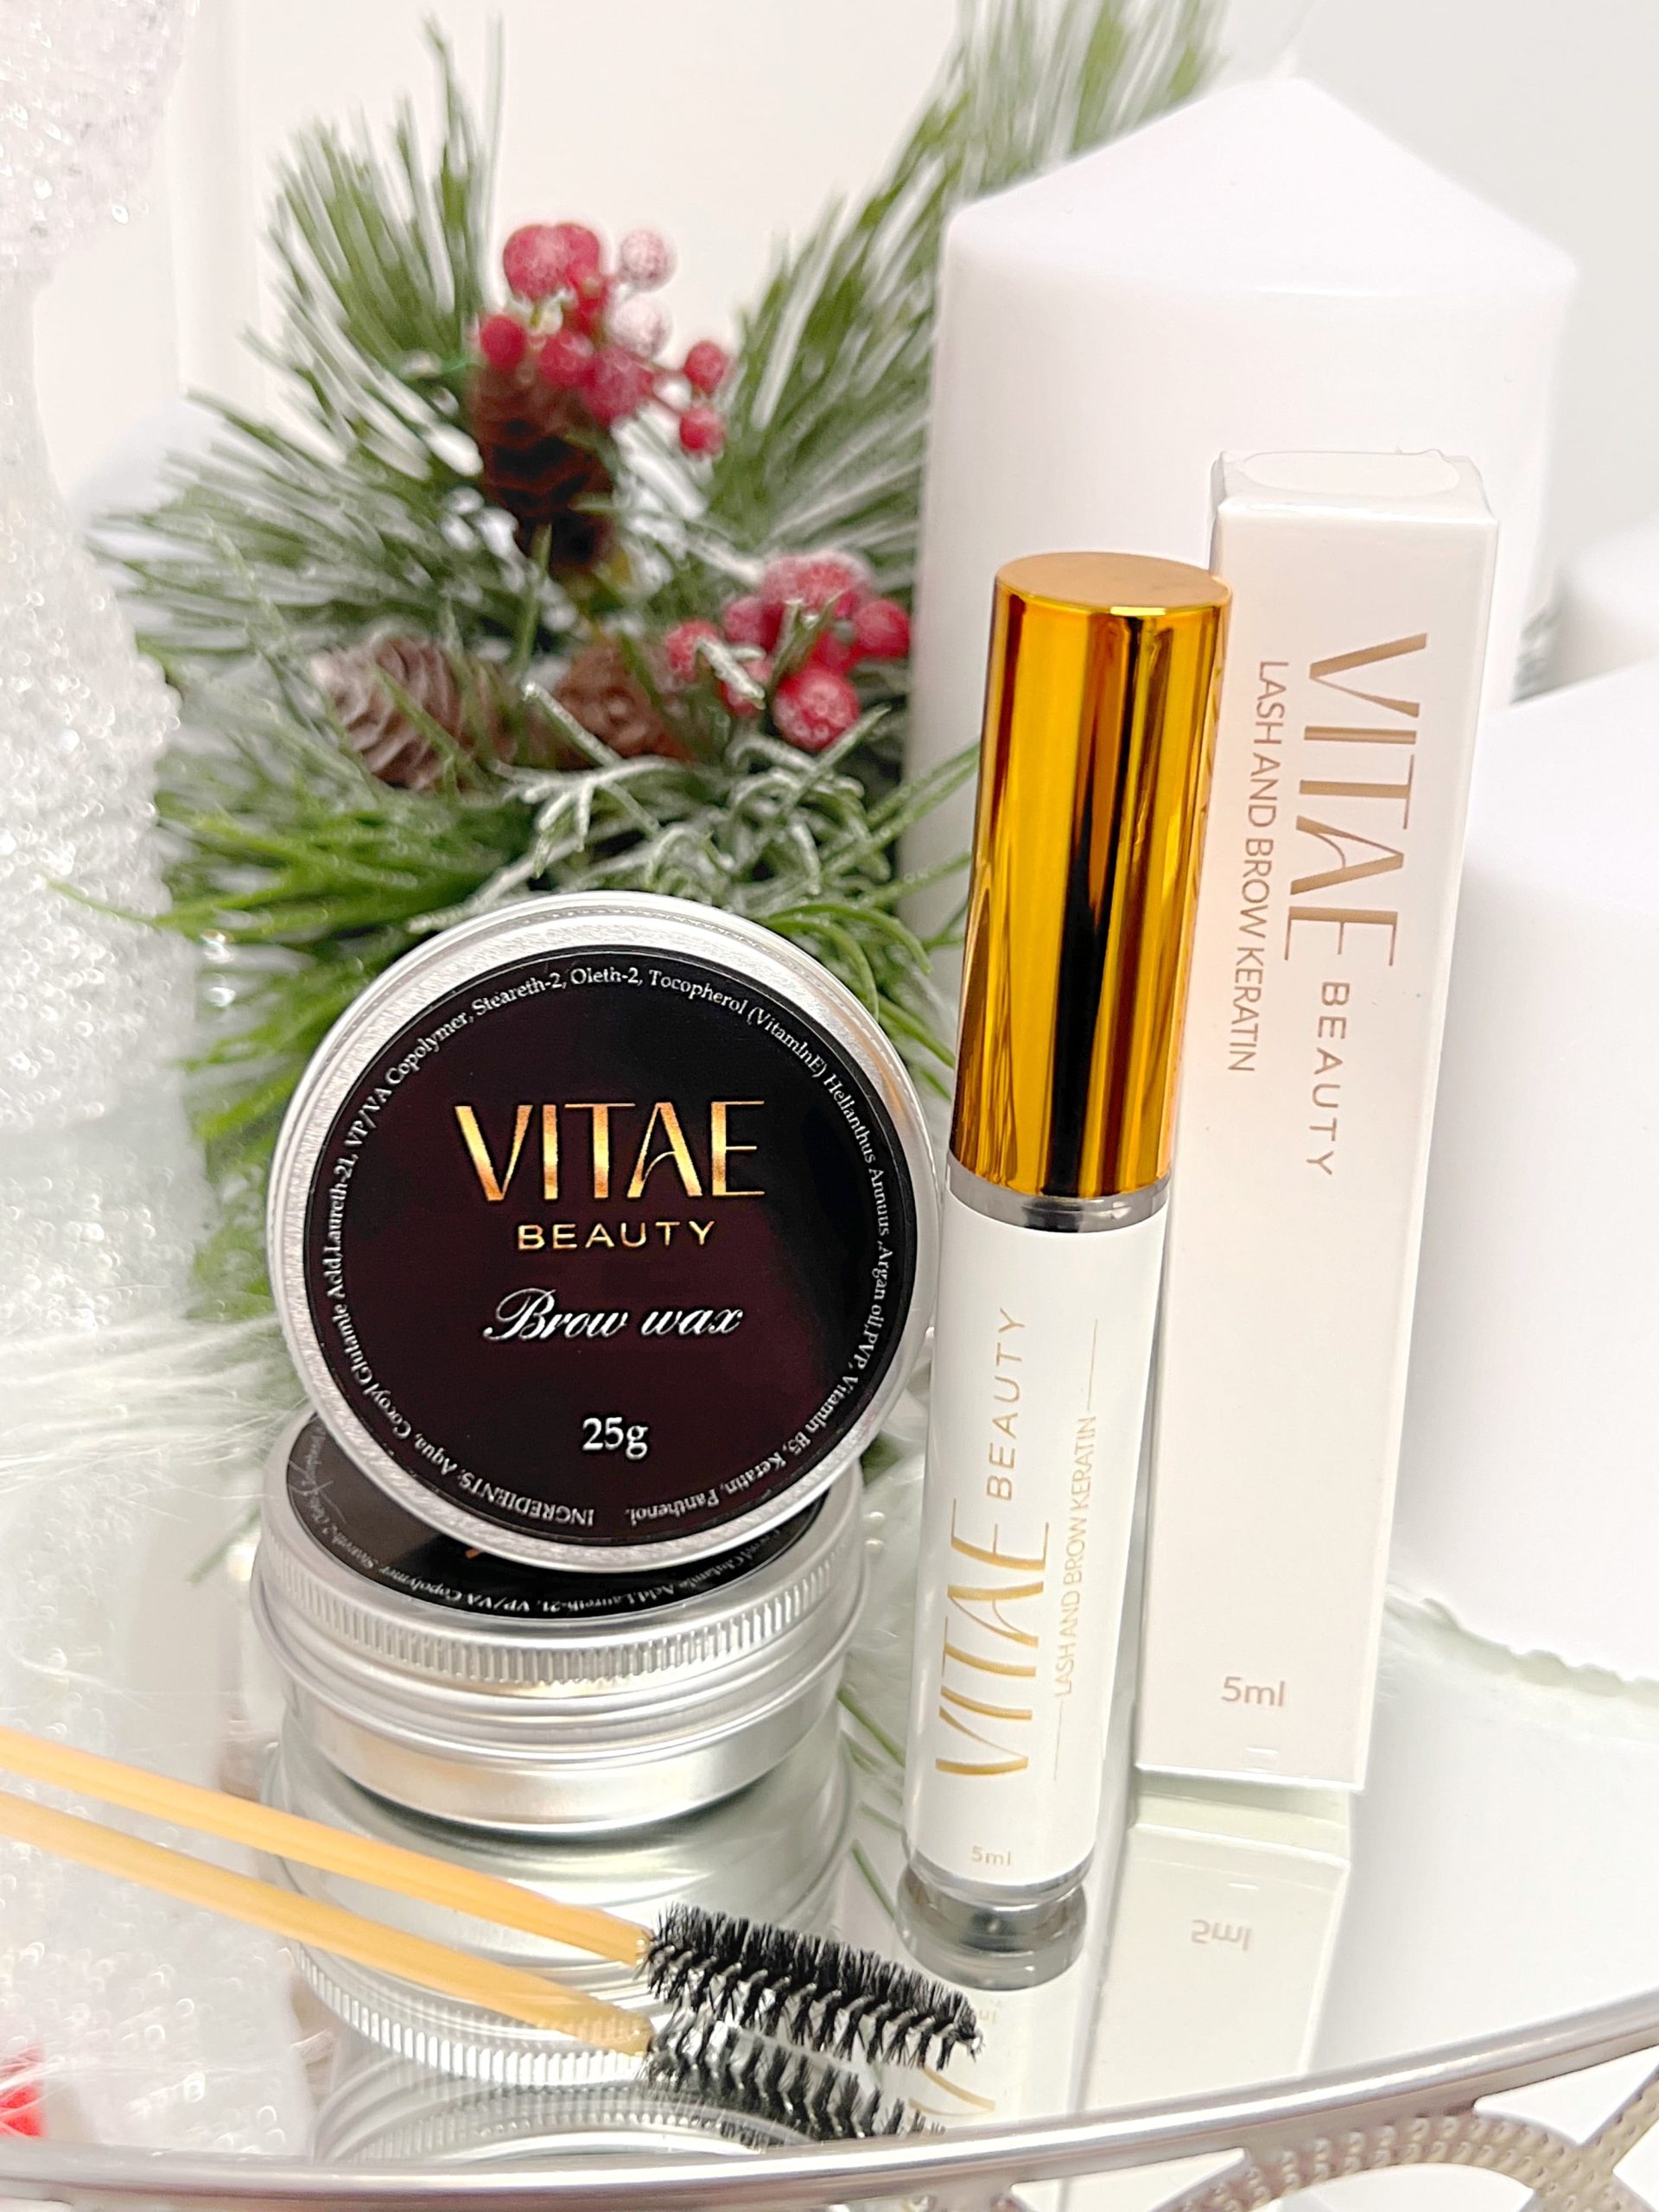 Vitae Beauty eyebrow wax + Keratin for lashes and brows